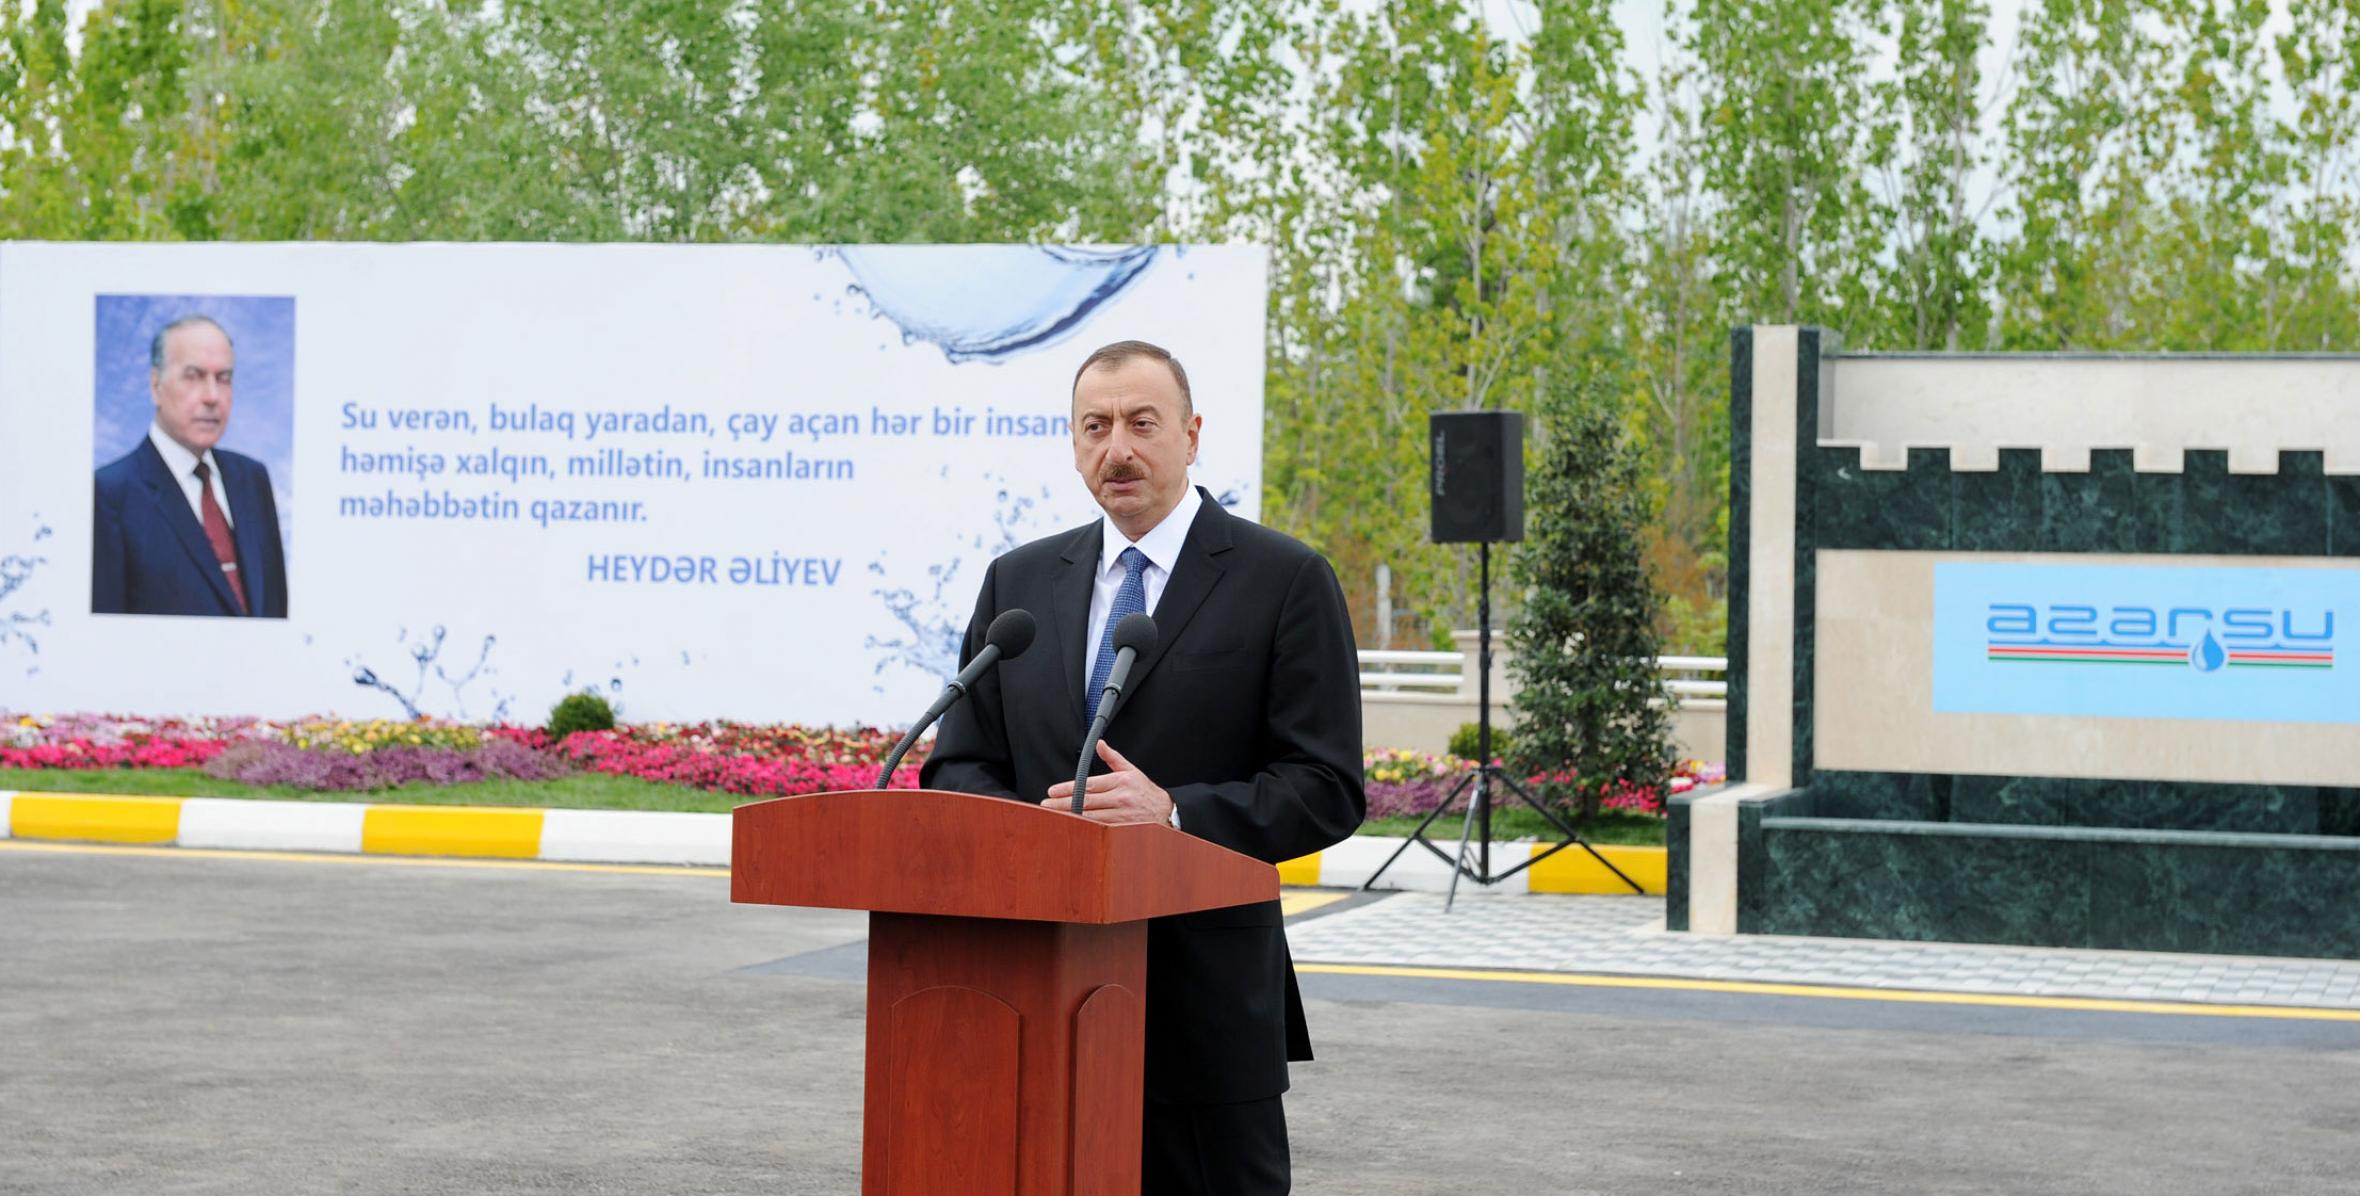 Ilham Aliyev attended the ceremony to mark the supply of drinking water to Hajigabul from the Shirvan-Mugan water system